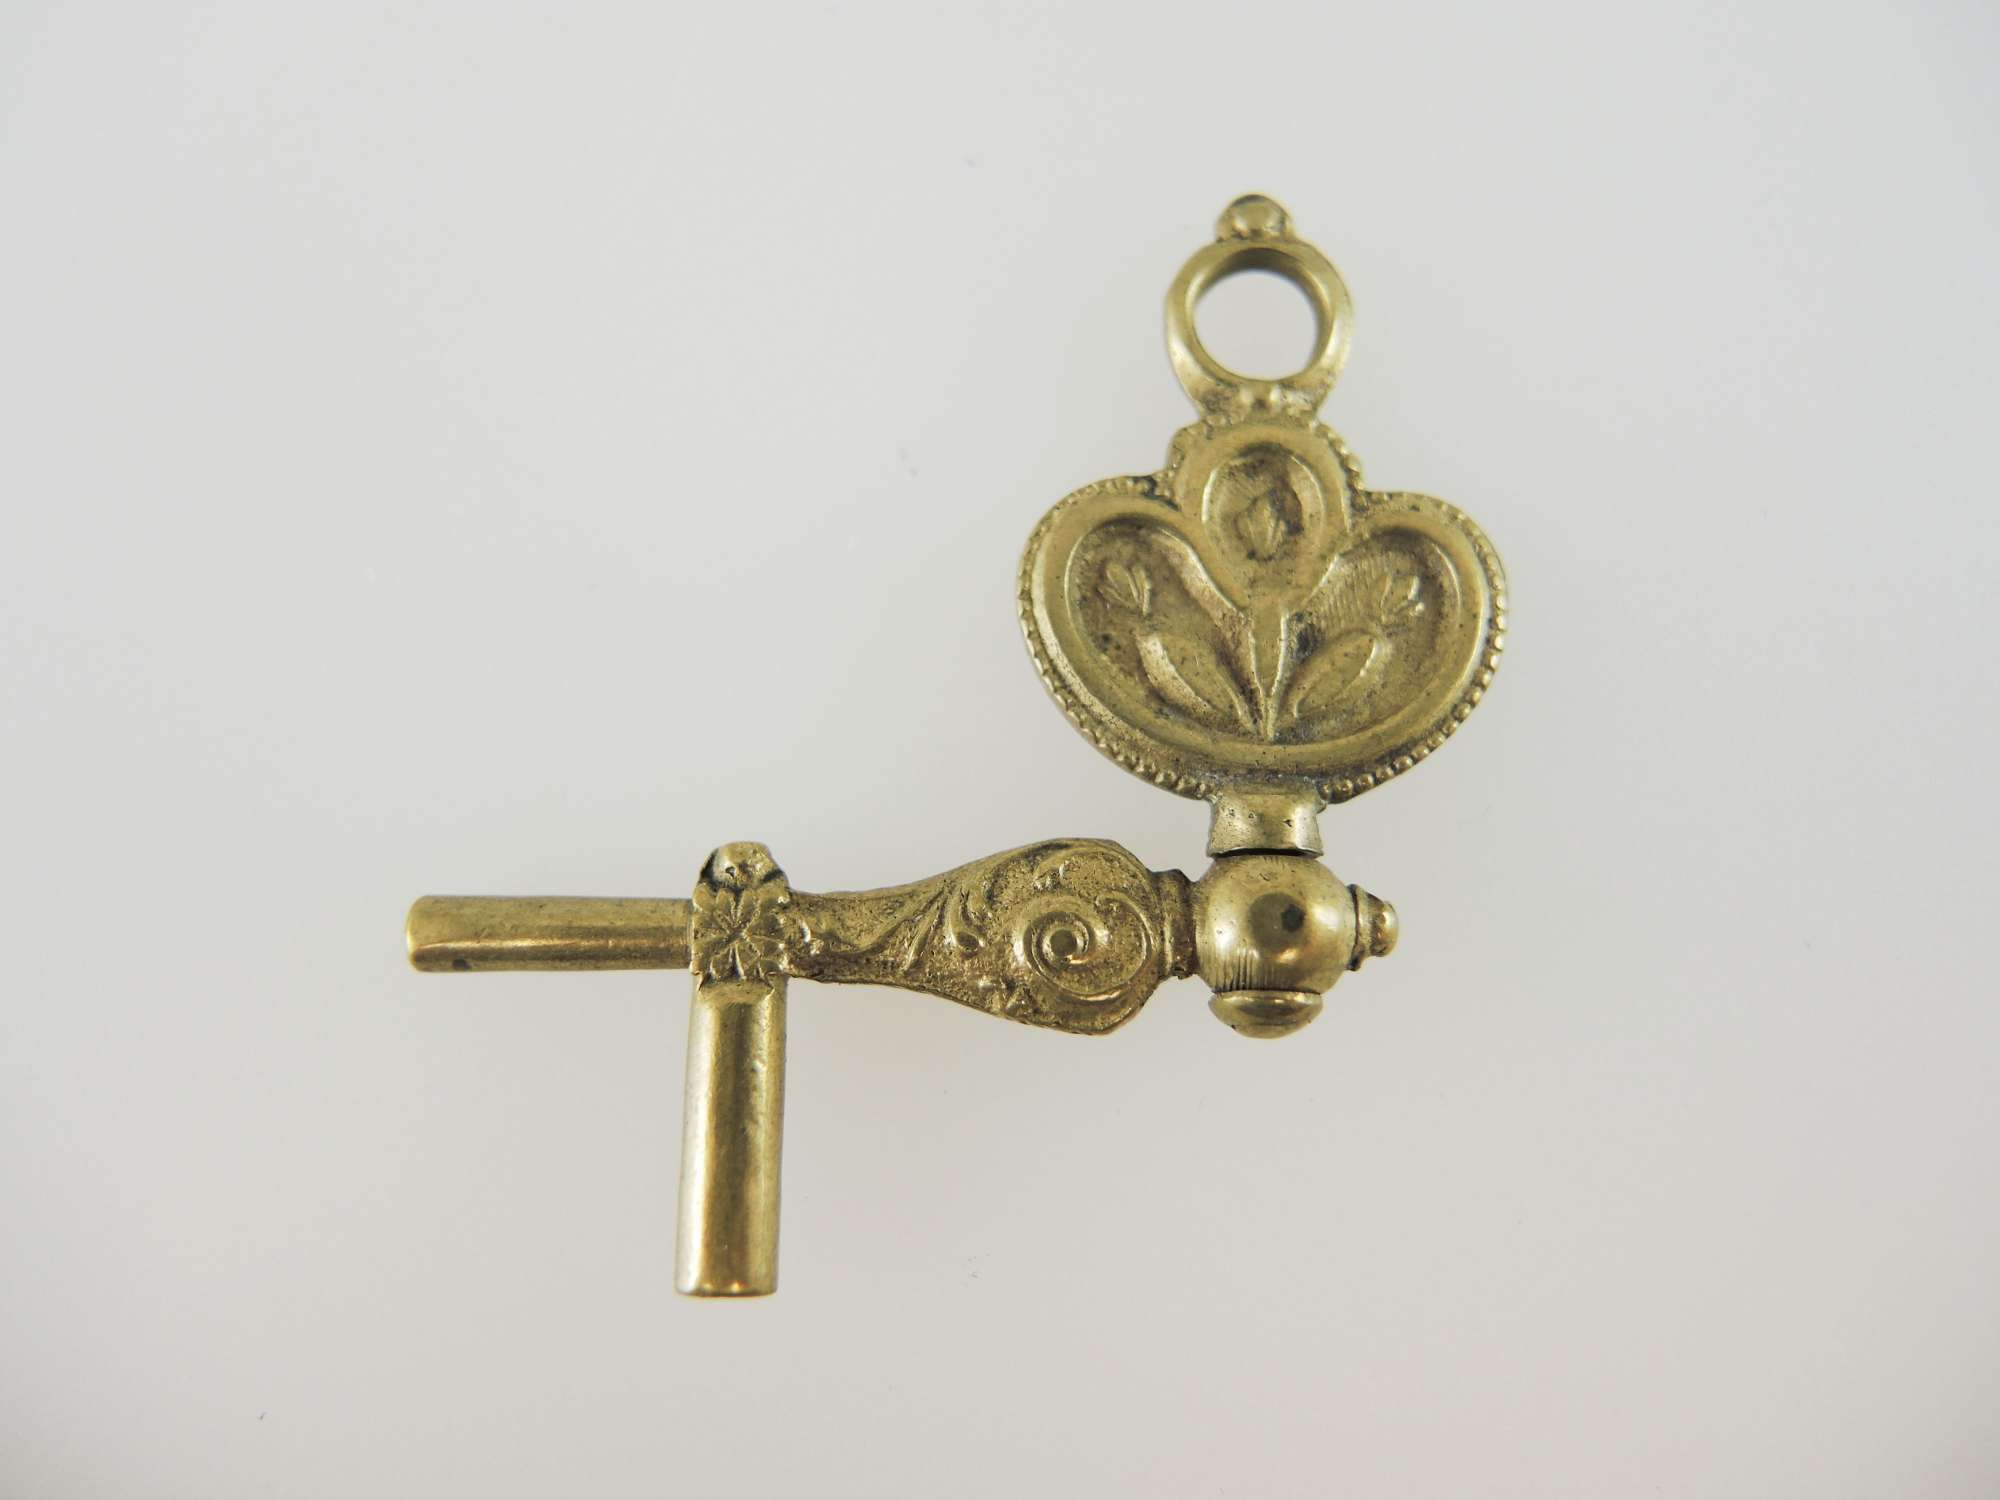 Unusual Early gilt double ended Crank pocket watch Key c1750